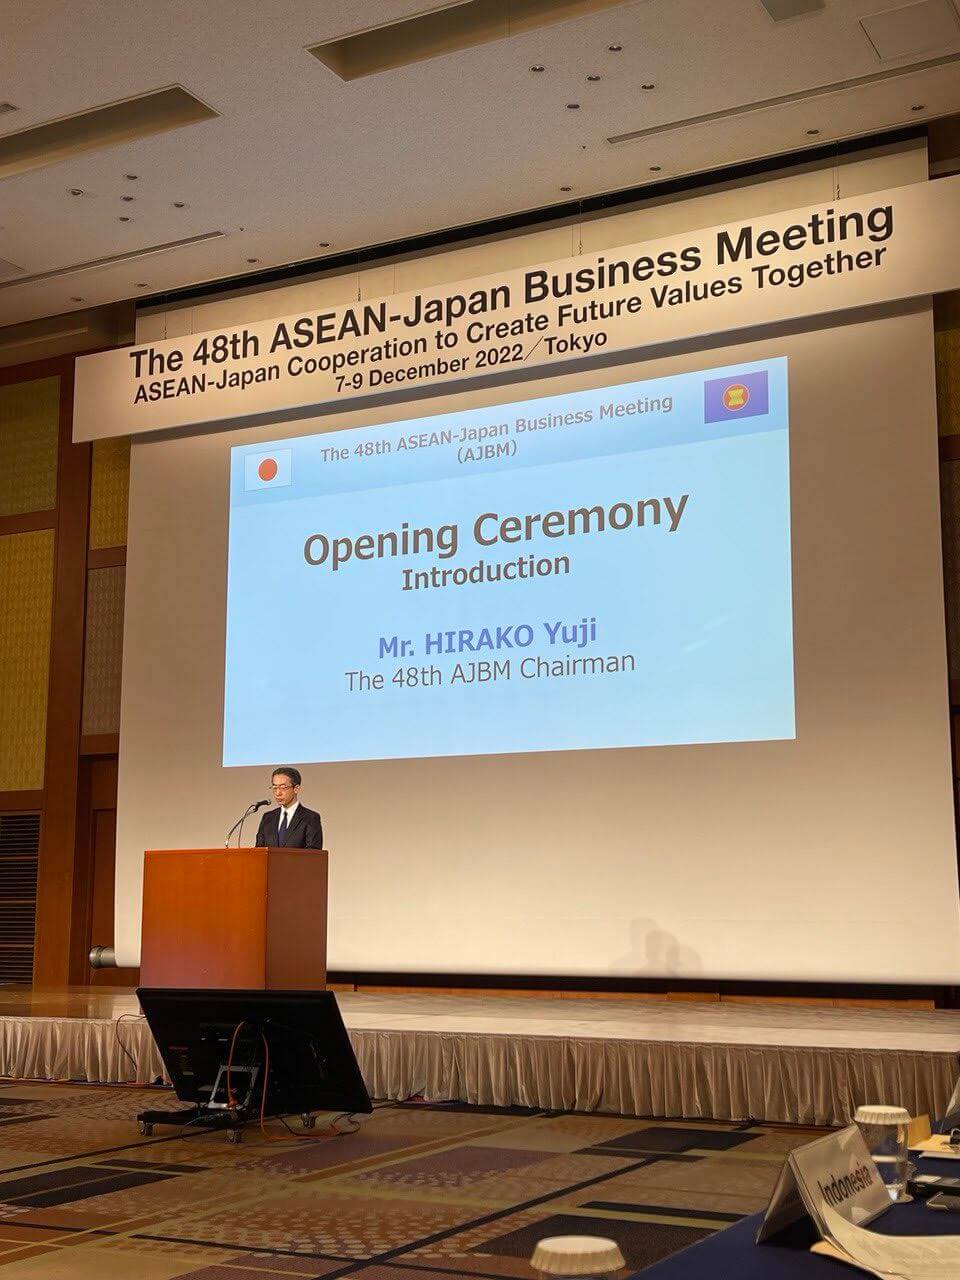 Opening Ceremony for the 48th ASEAN-Japan Business Meeting